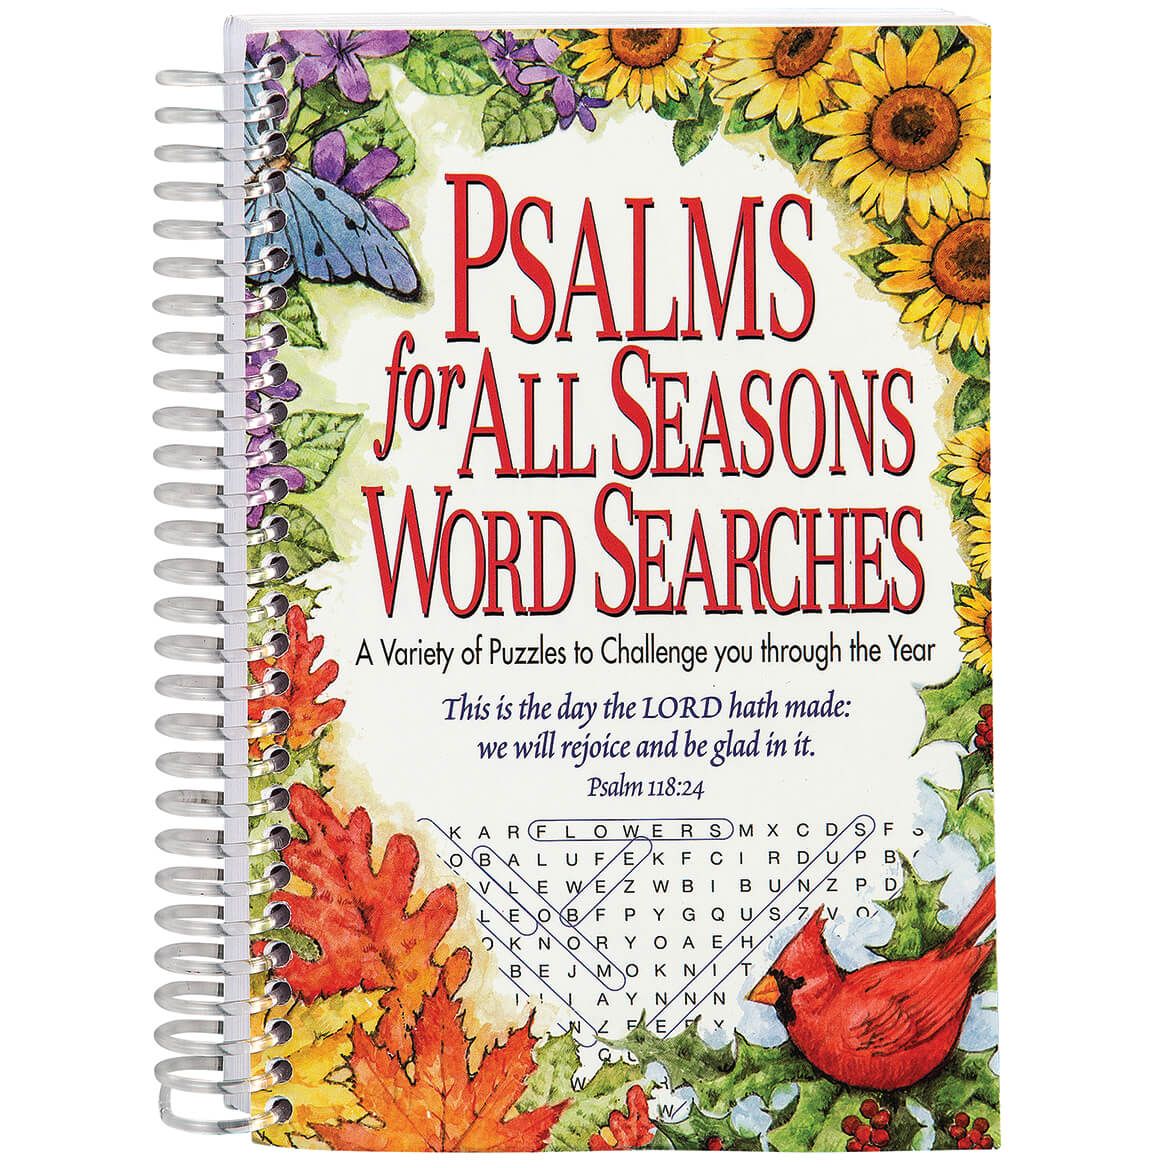 Psalms for All Seasons Word Searches + '-' + 373968